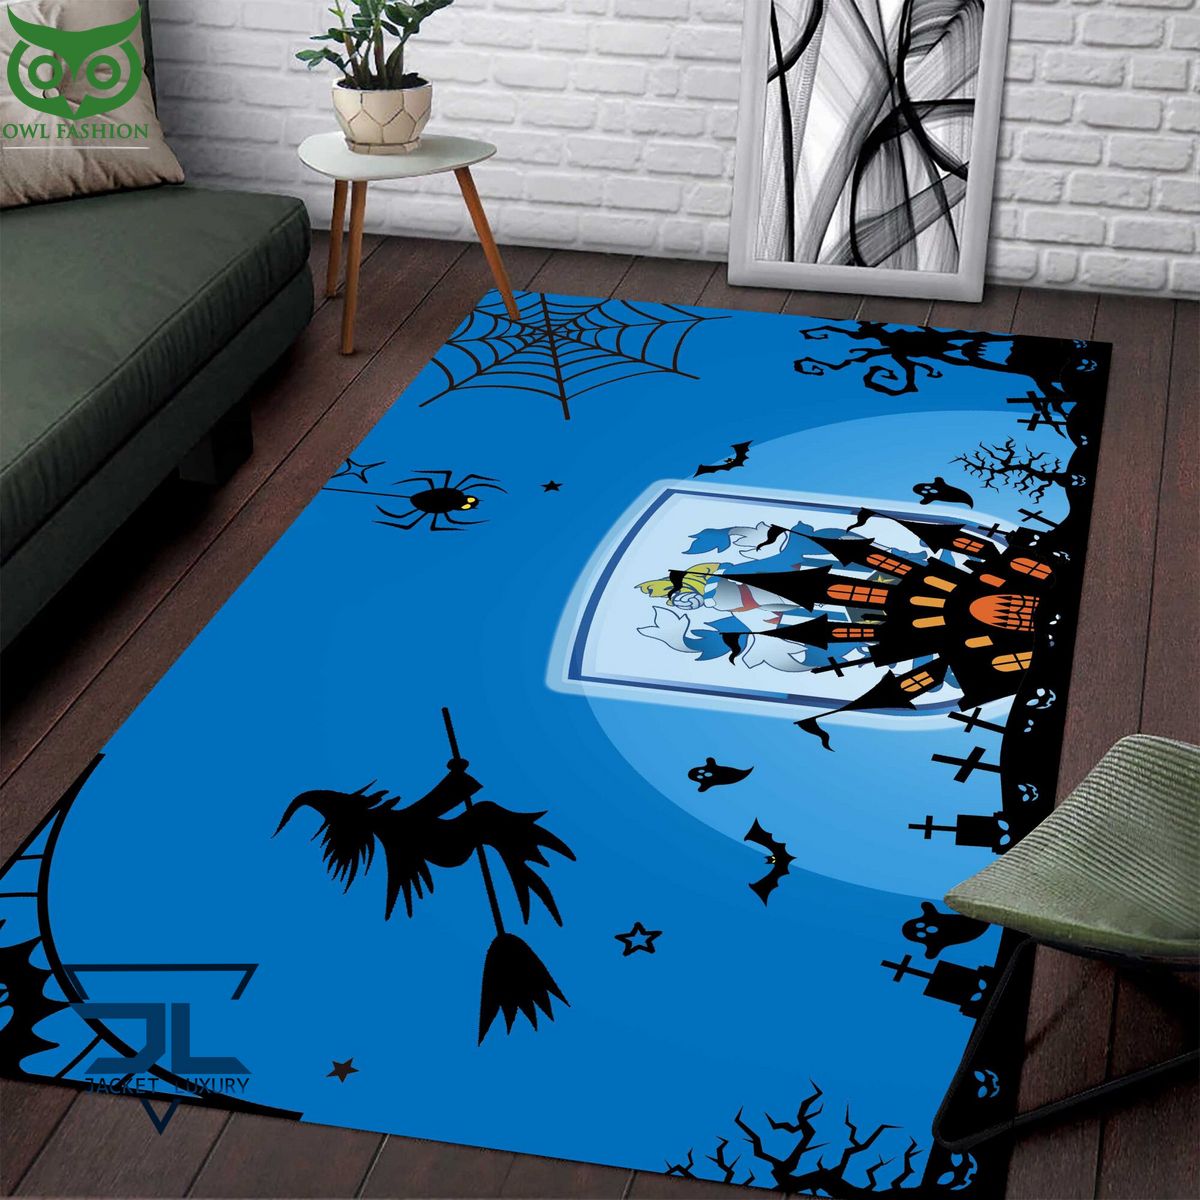 Huddersfield Town A.F.C EFL New Carpet Rug You tried editing this time?